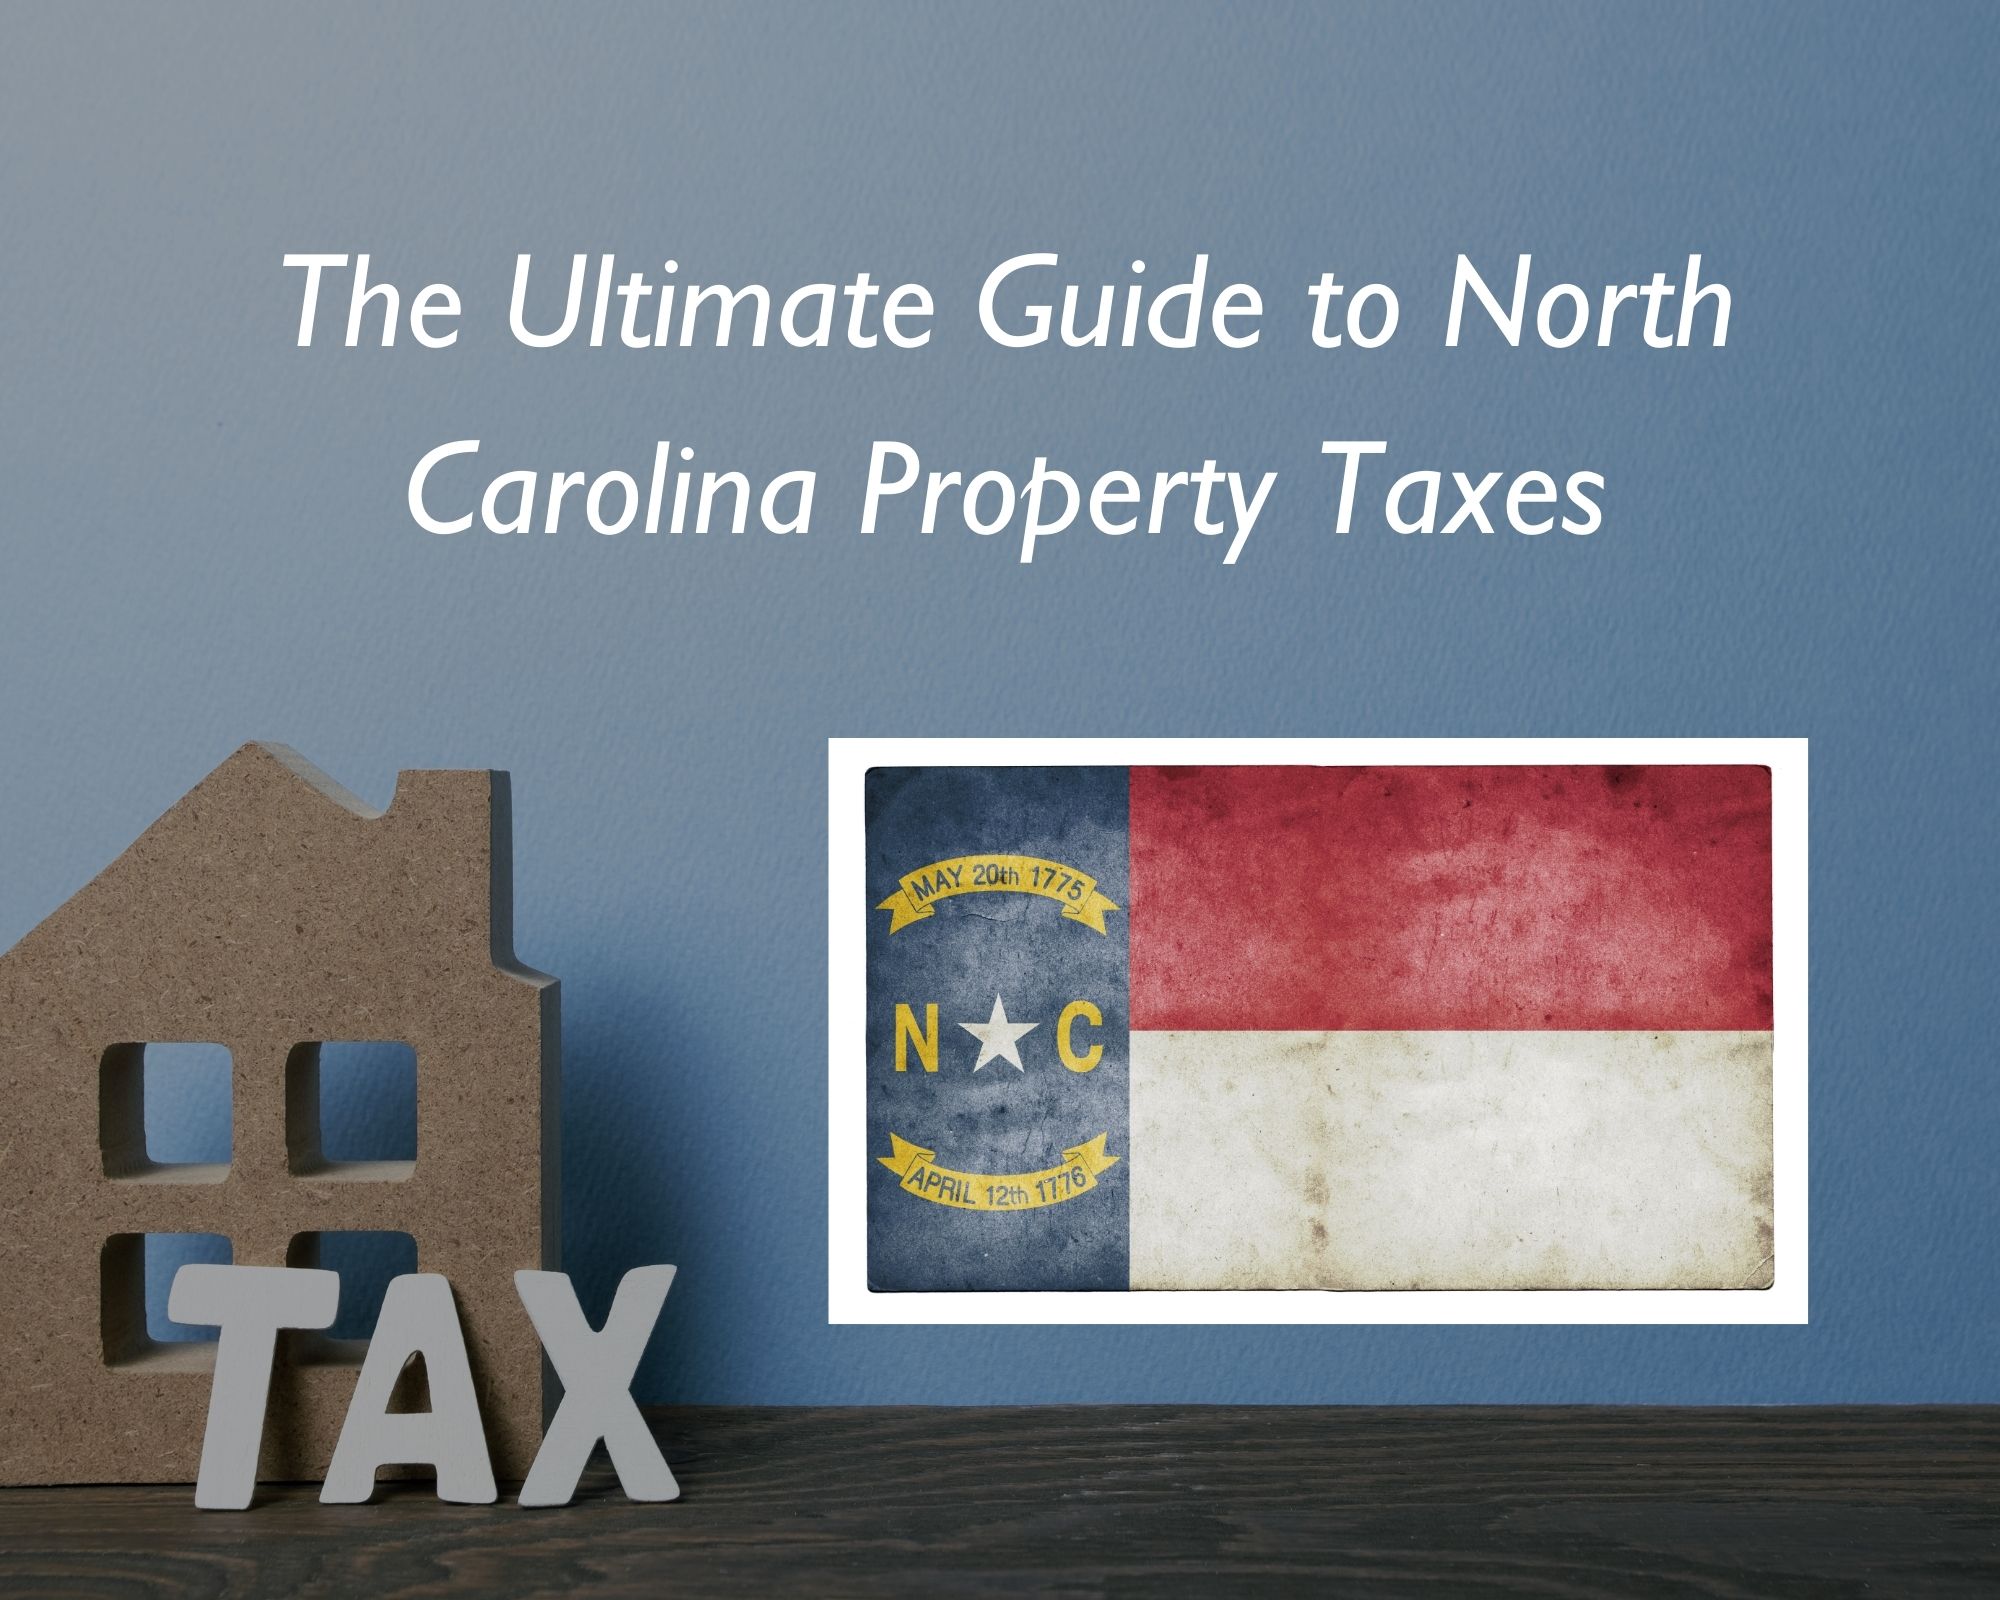 The Ultimate Guide to North Carolina Property Taxes